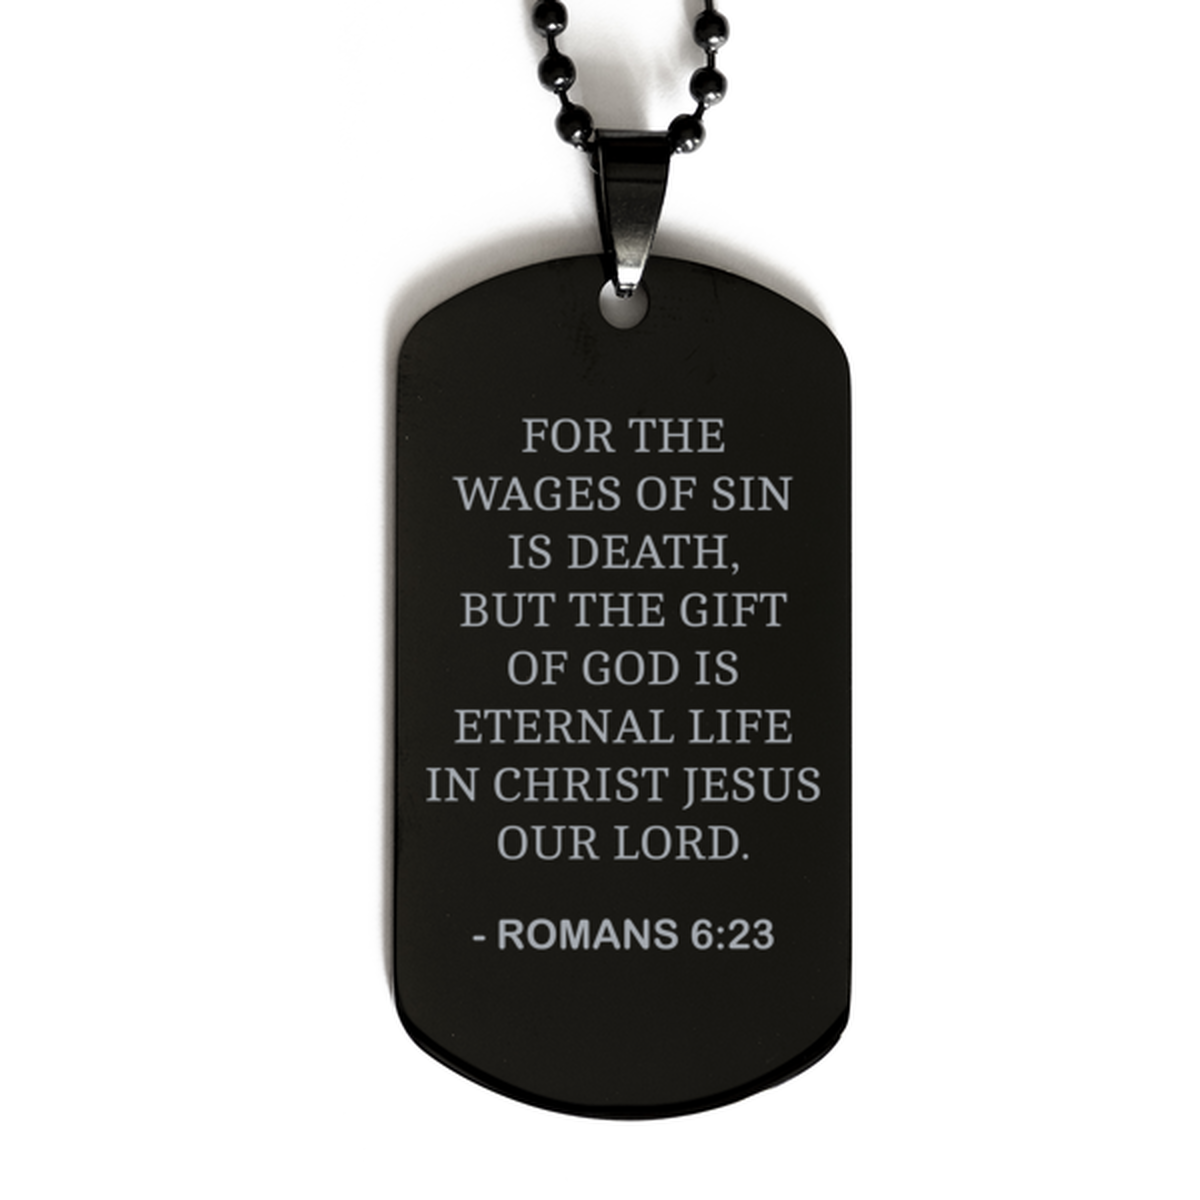 Bible Verse Black Dog Tag, Romans 6:23 For The Wages Of Sin Is Death, But The Gift Of, Christian Inspirational Necklace Gifts For Men Women